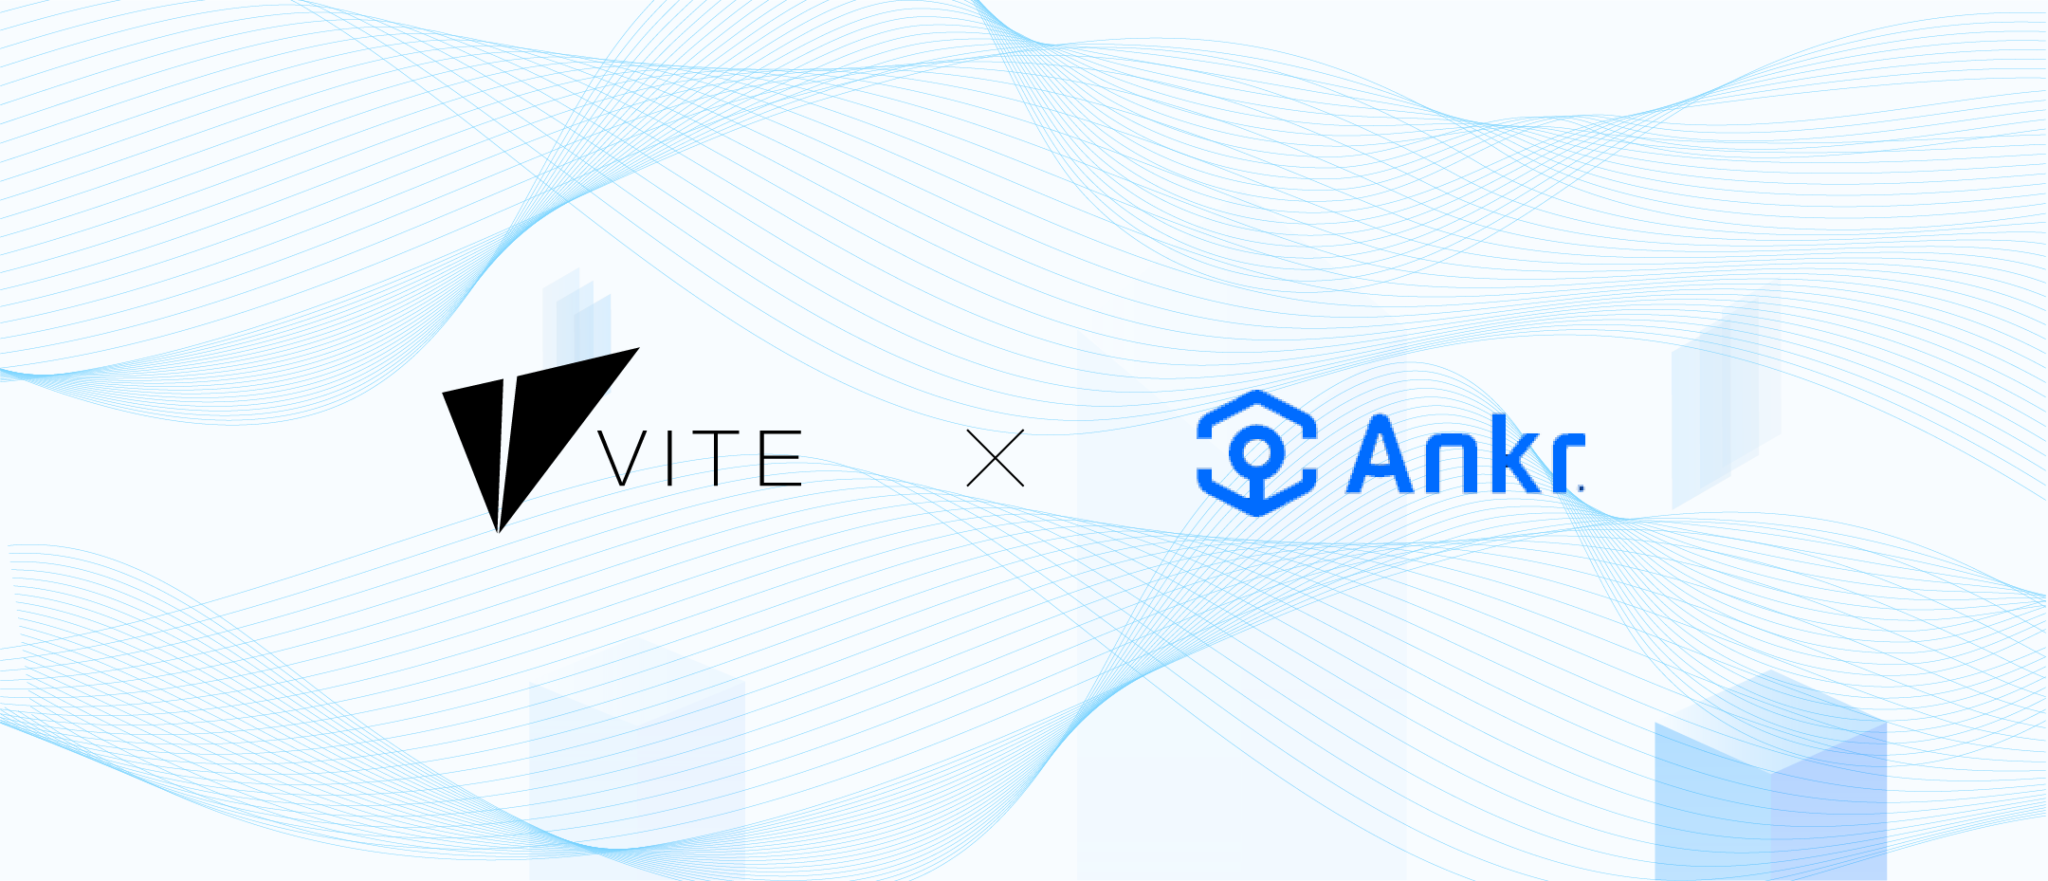 Vite are thrilled to announce an update of their ...